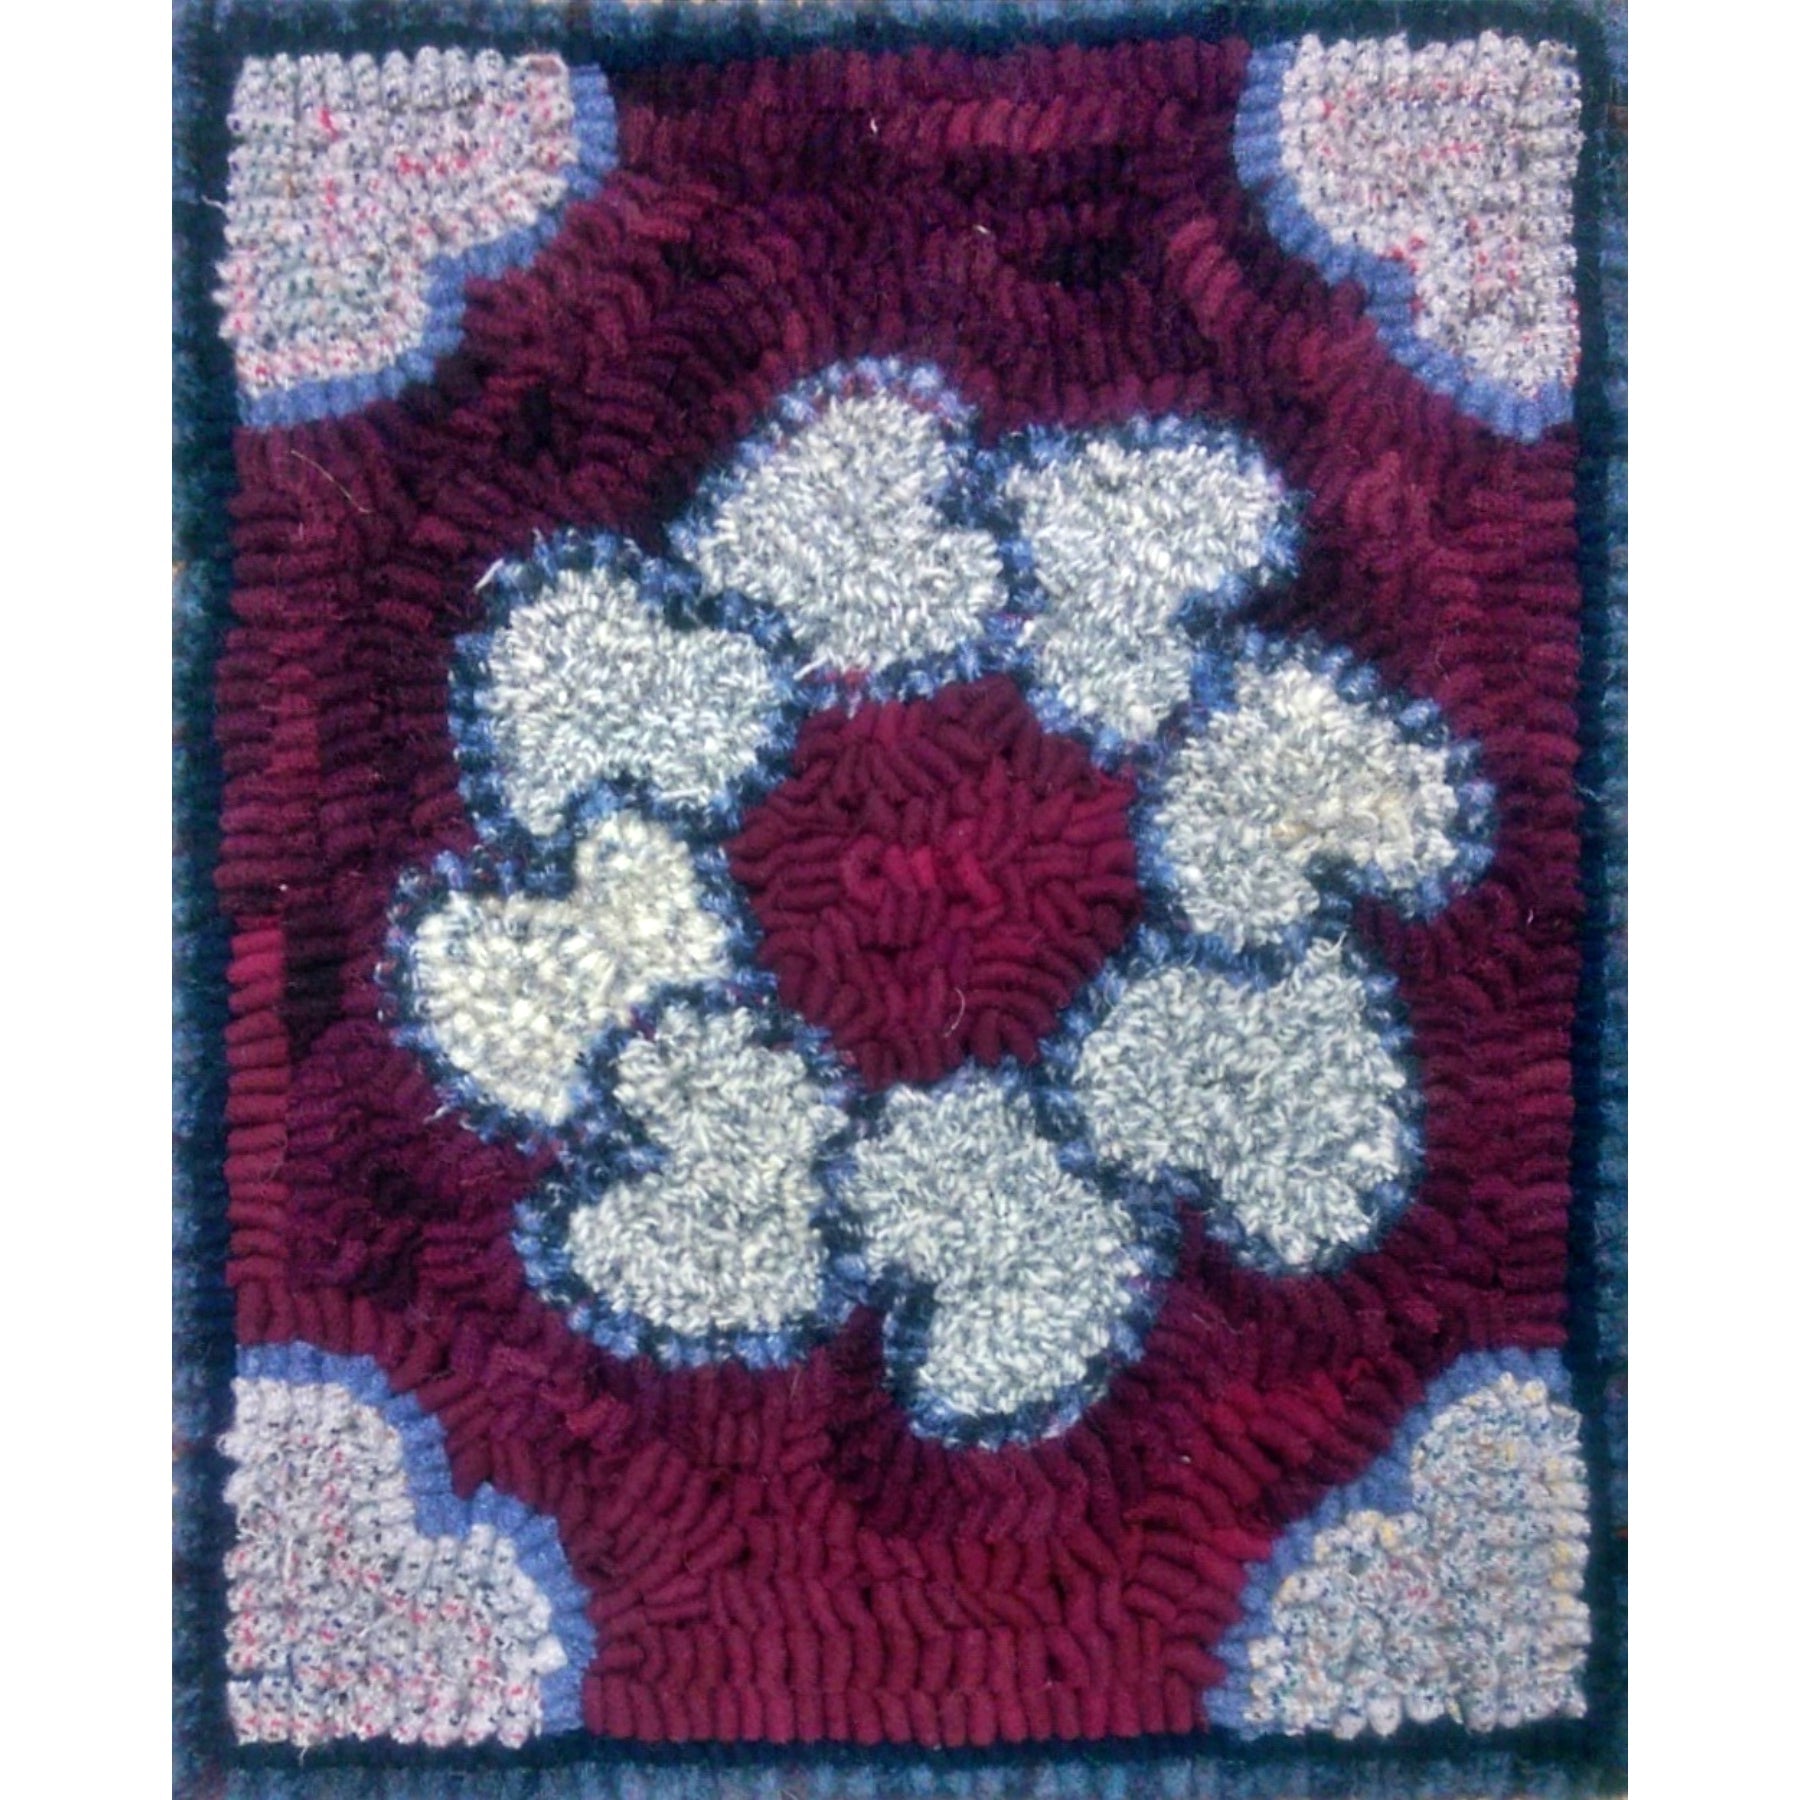 Circle Heart Quilt Square, rug hooked by Connie Bradley